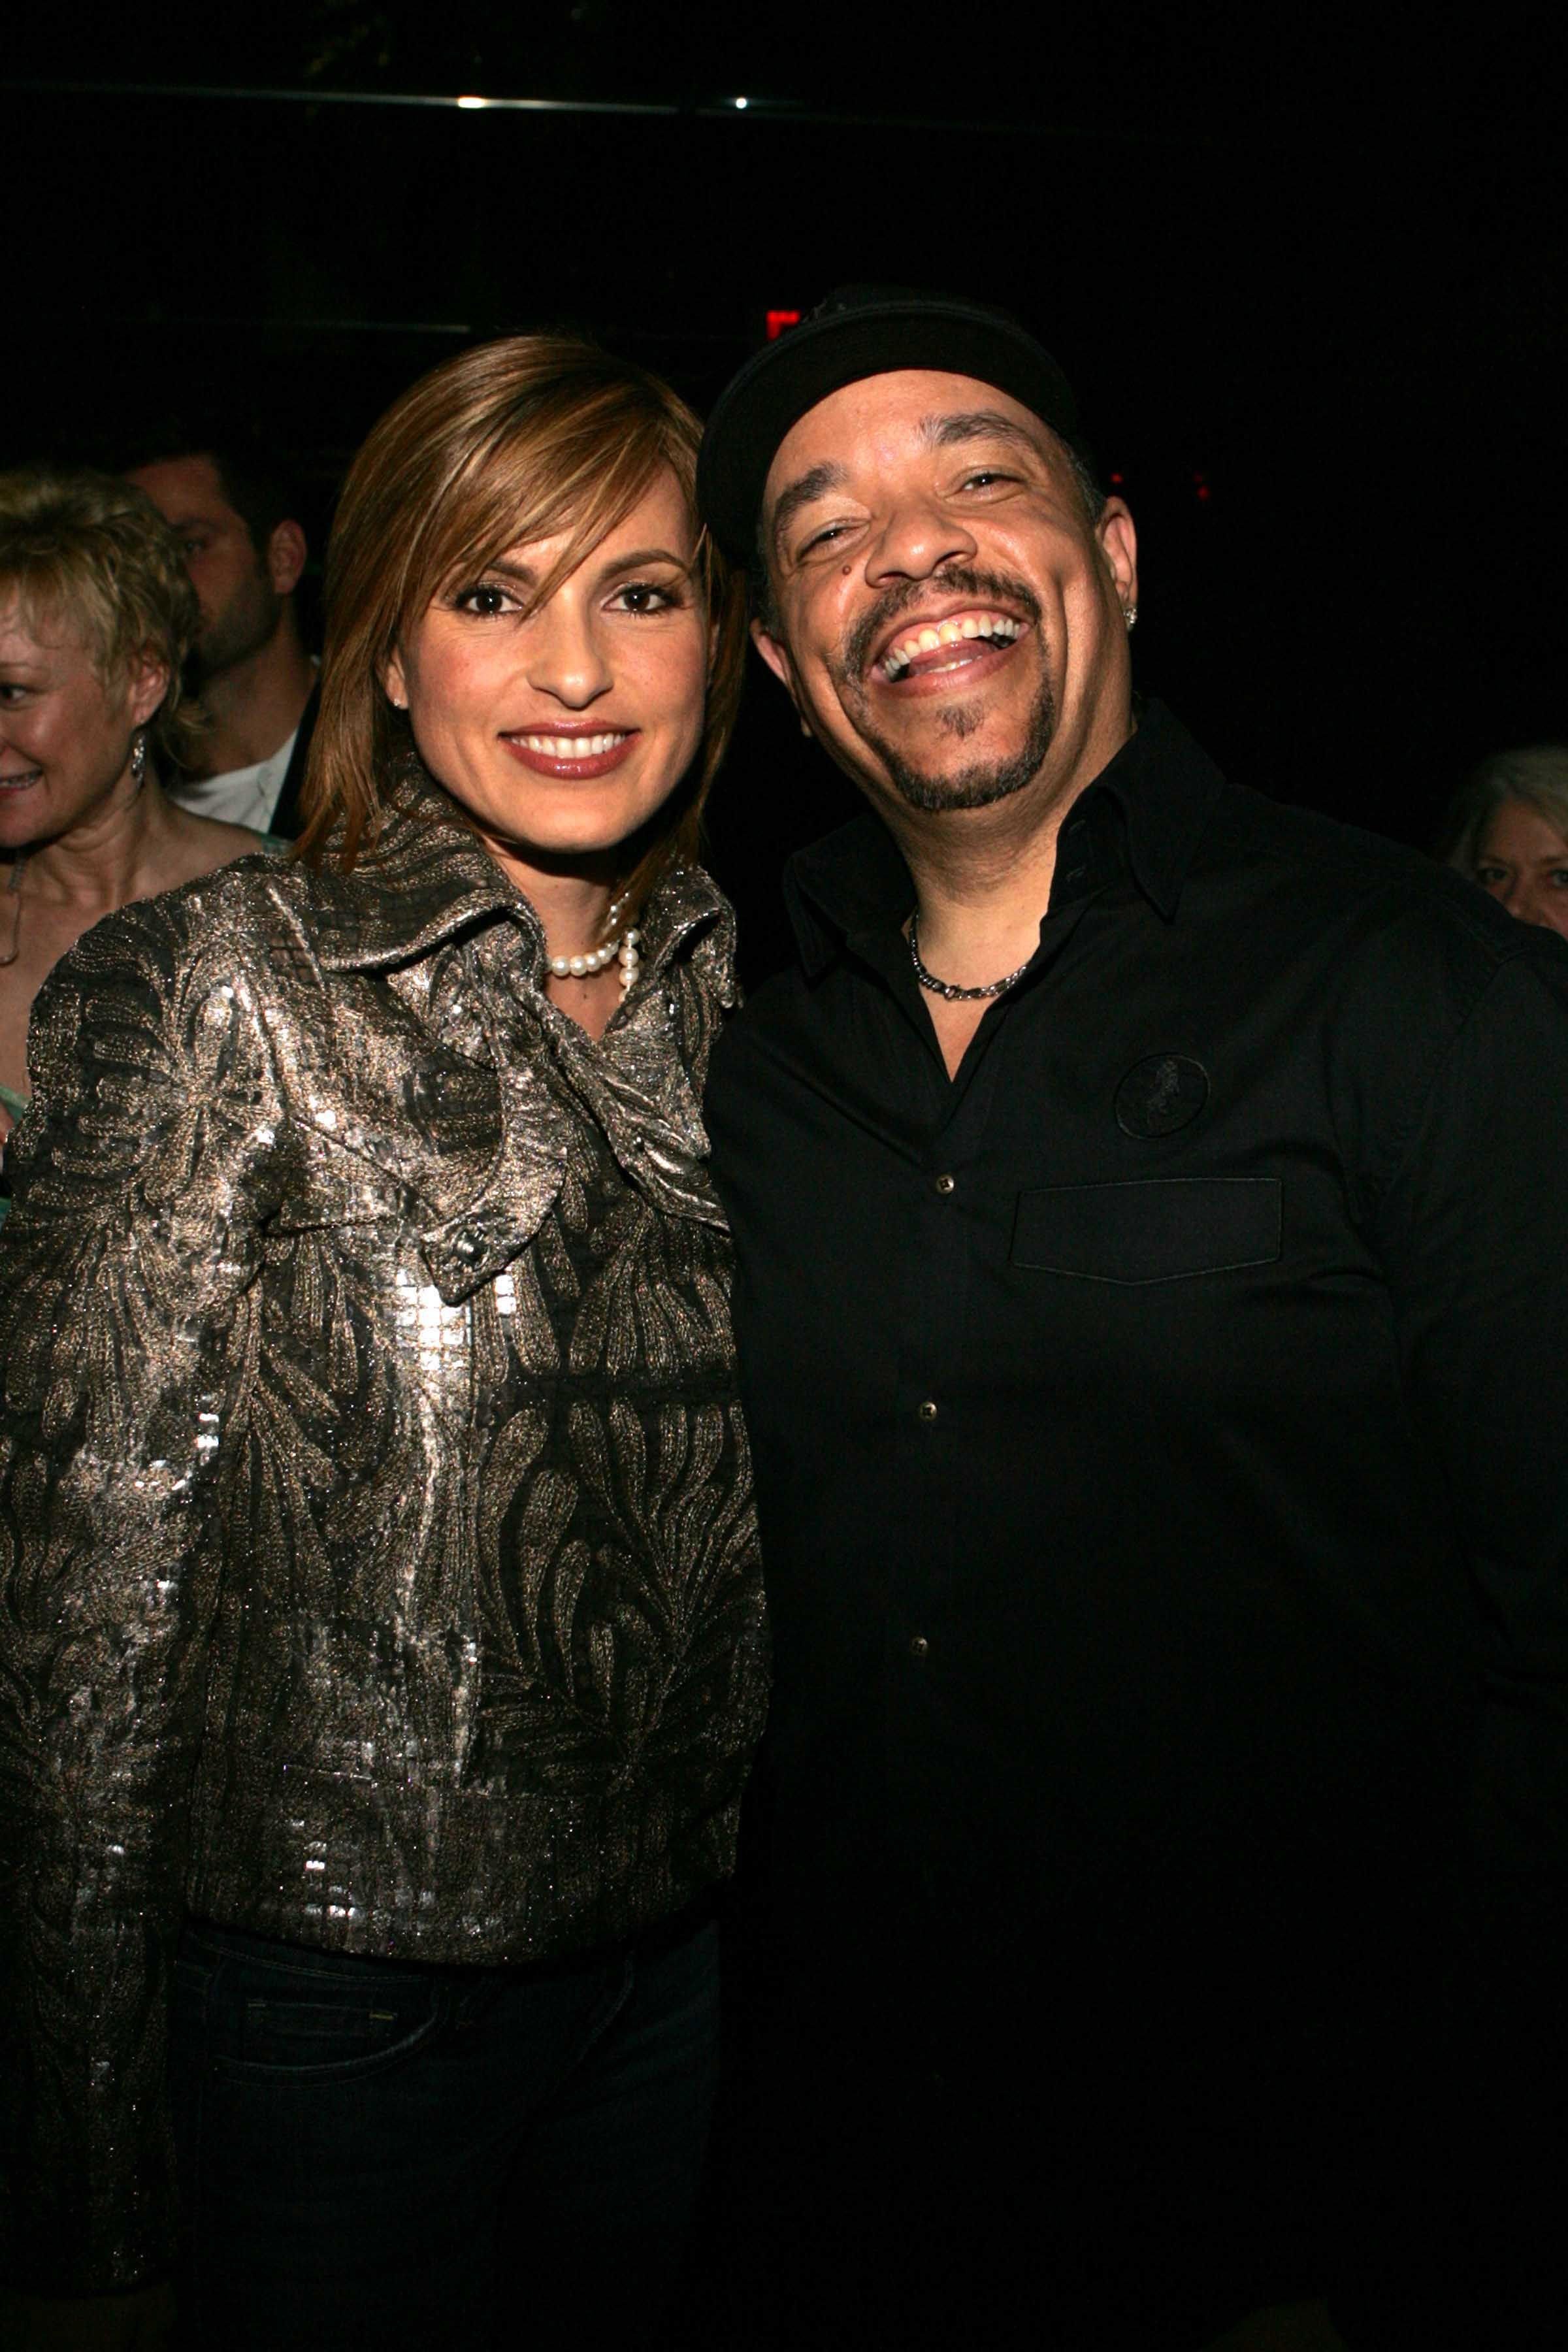 Ice-T and "Law & Order: Special Victims Unit" costar Mariska Hargitay in 2005 | Source: Getty Images